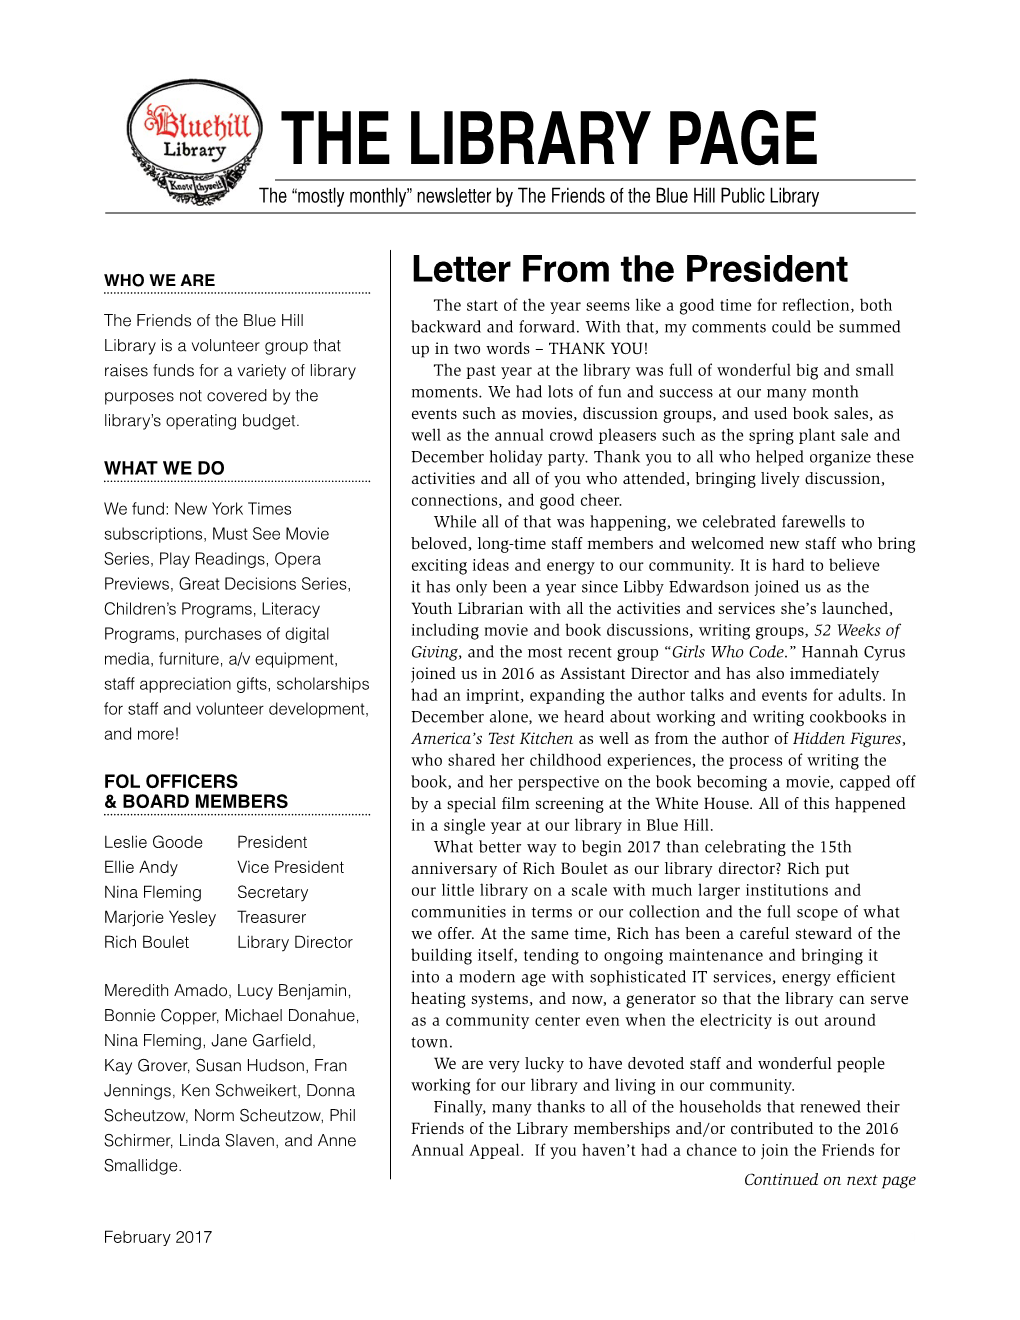 THE LIBRARY PAGE the “Mostly Monthly” Newsletter by the Friends of the Blue Hill Public Library